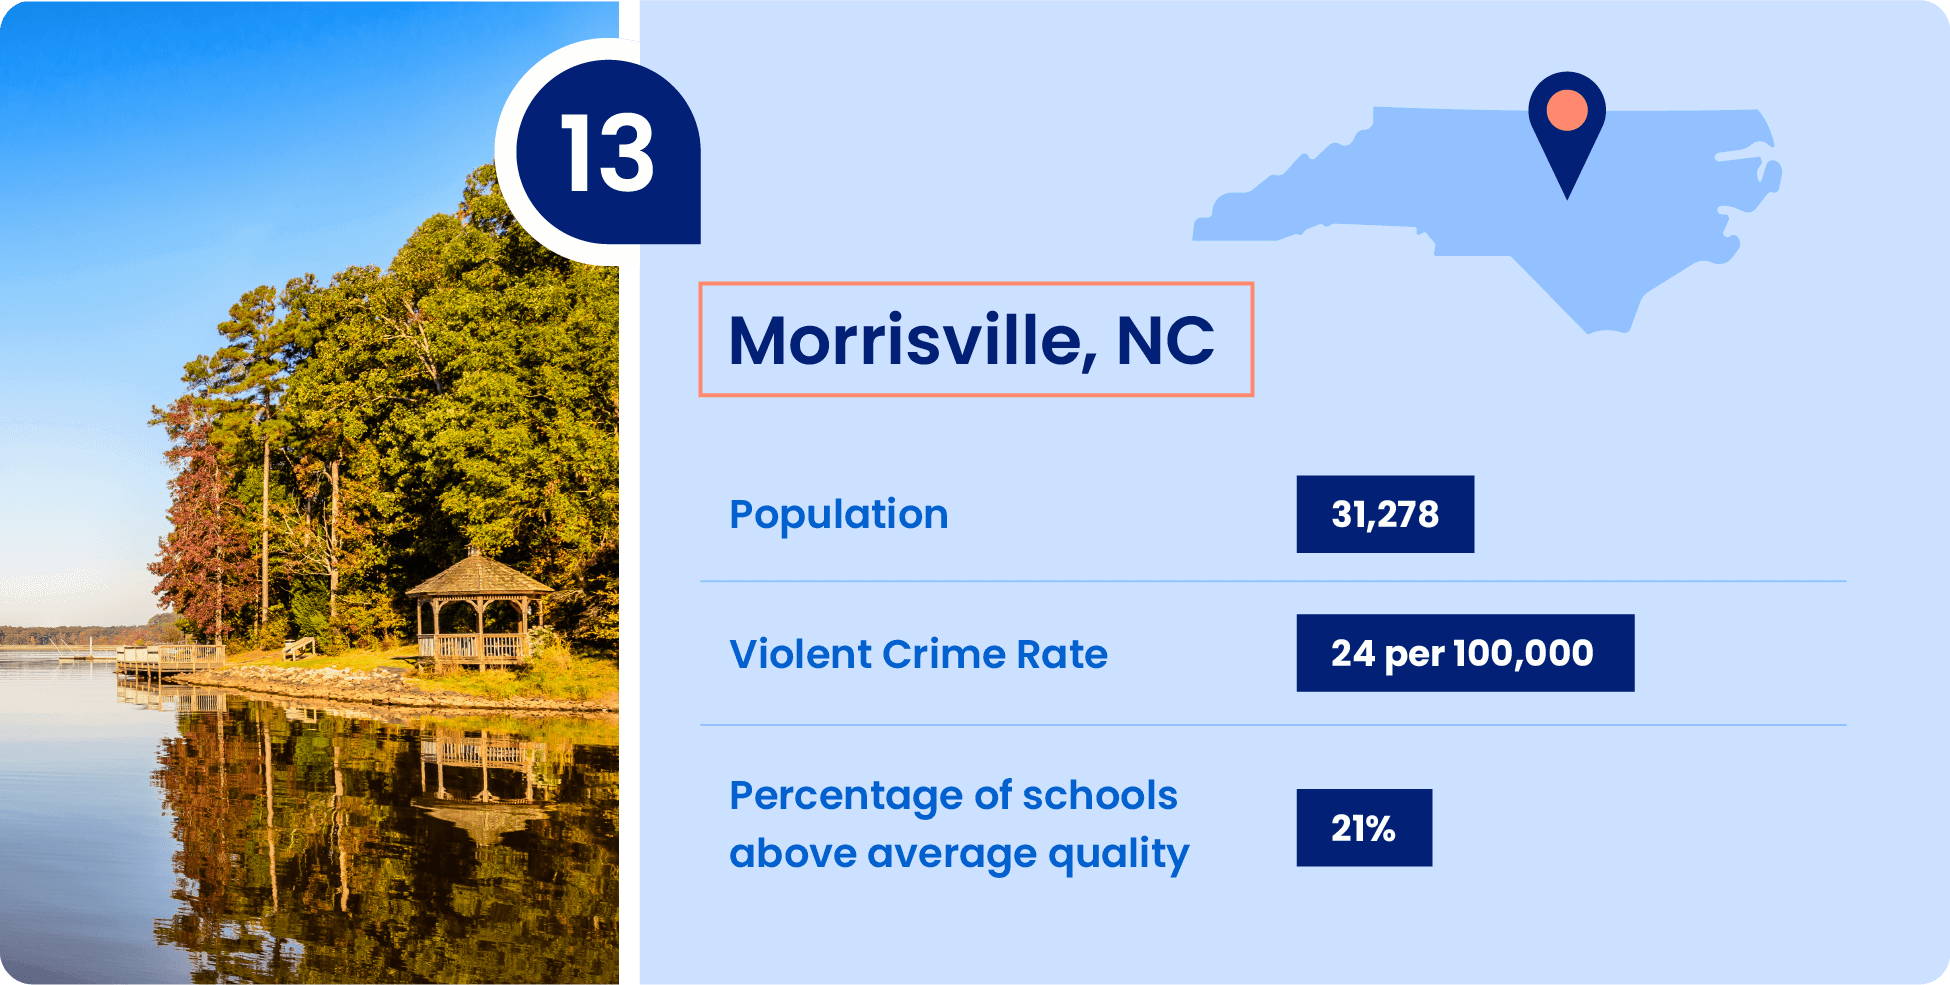 Image shows key information that make Morrisville, North Carolina a great place to raise a family.